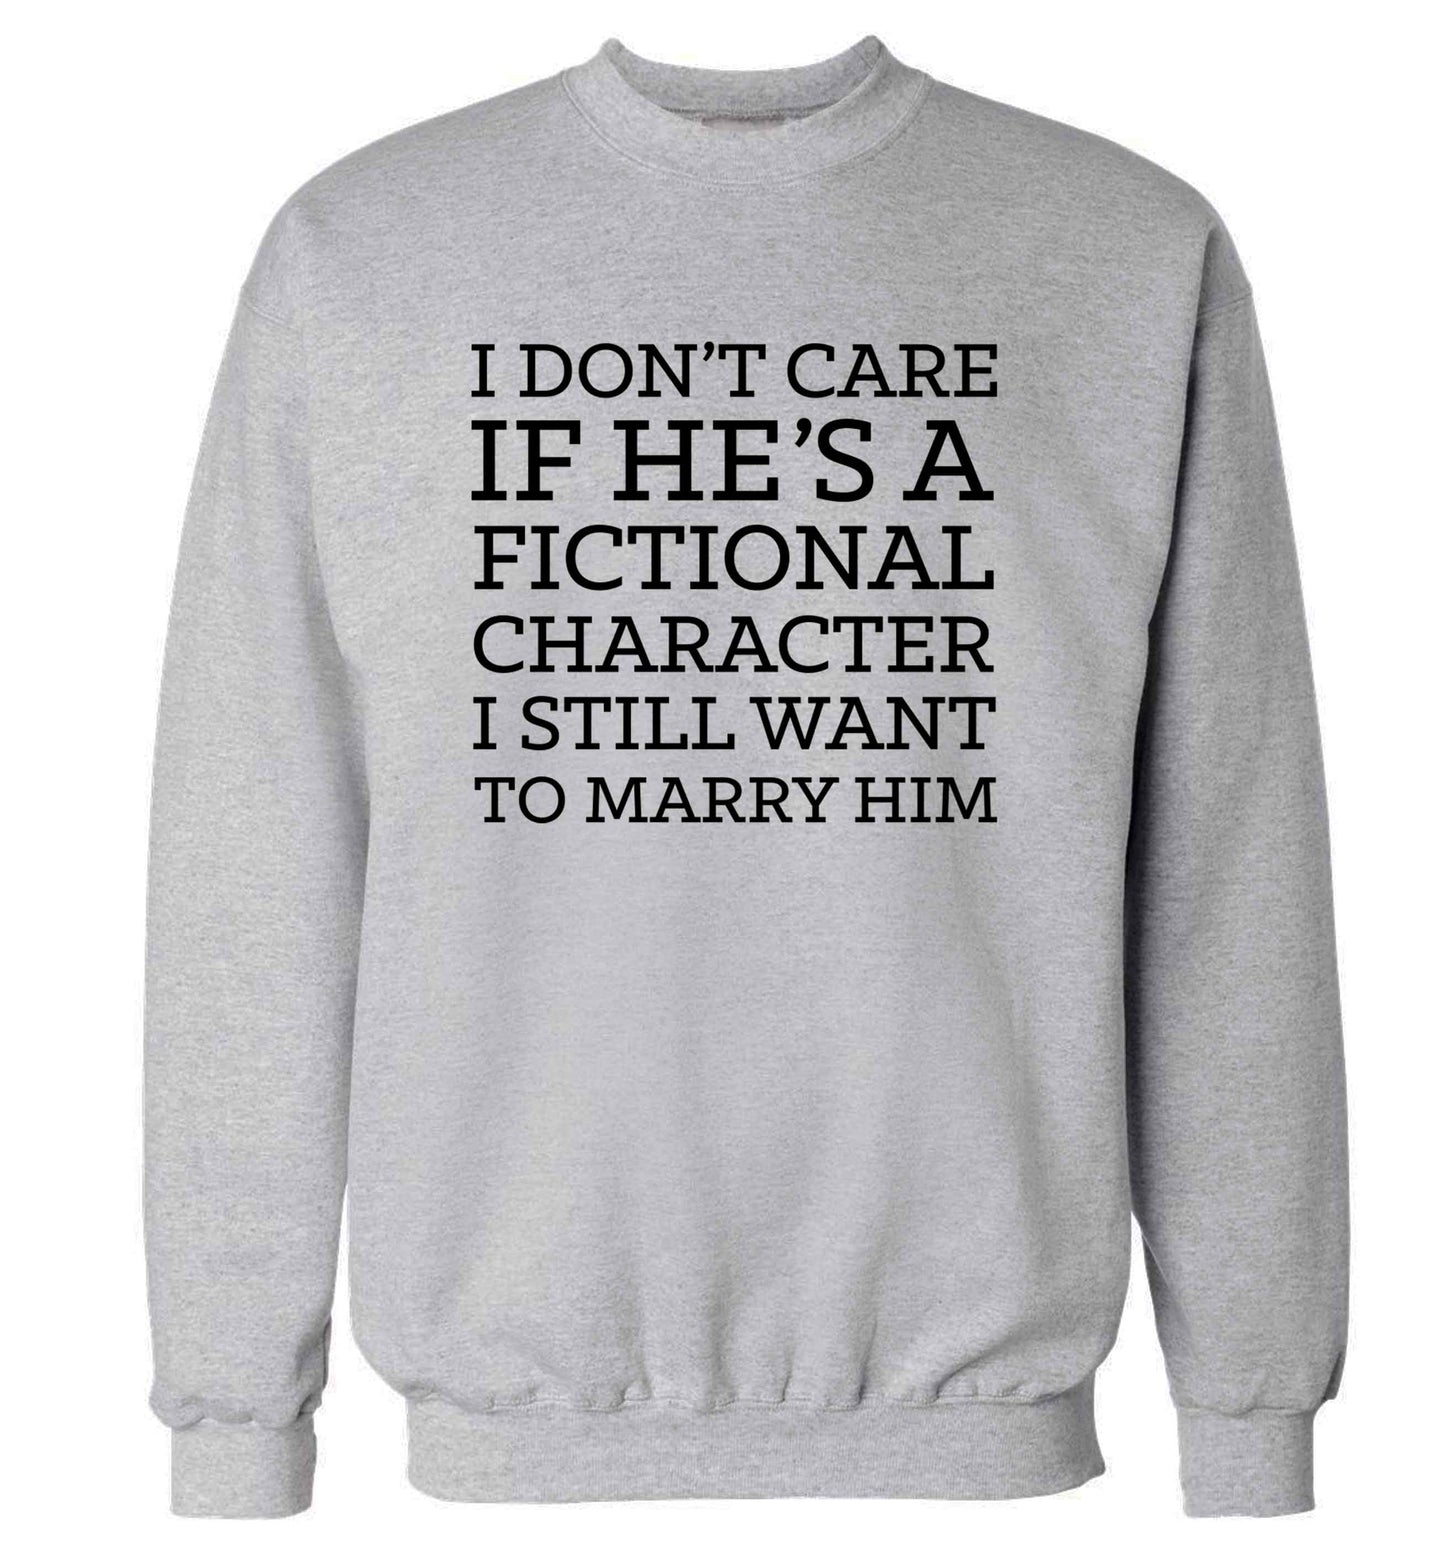 I don't care if he's a fictional character I still want to marry him adult's unisex grey sweater 2XL